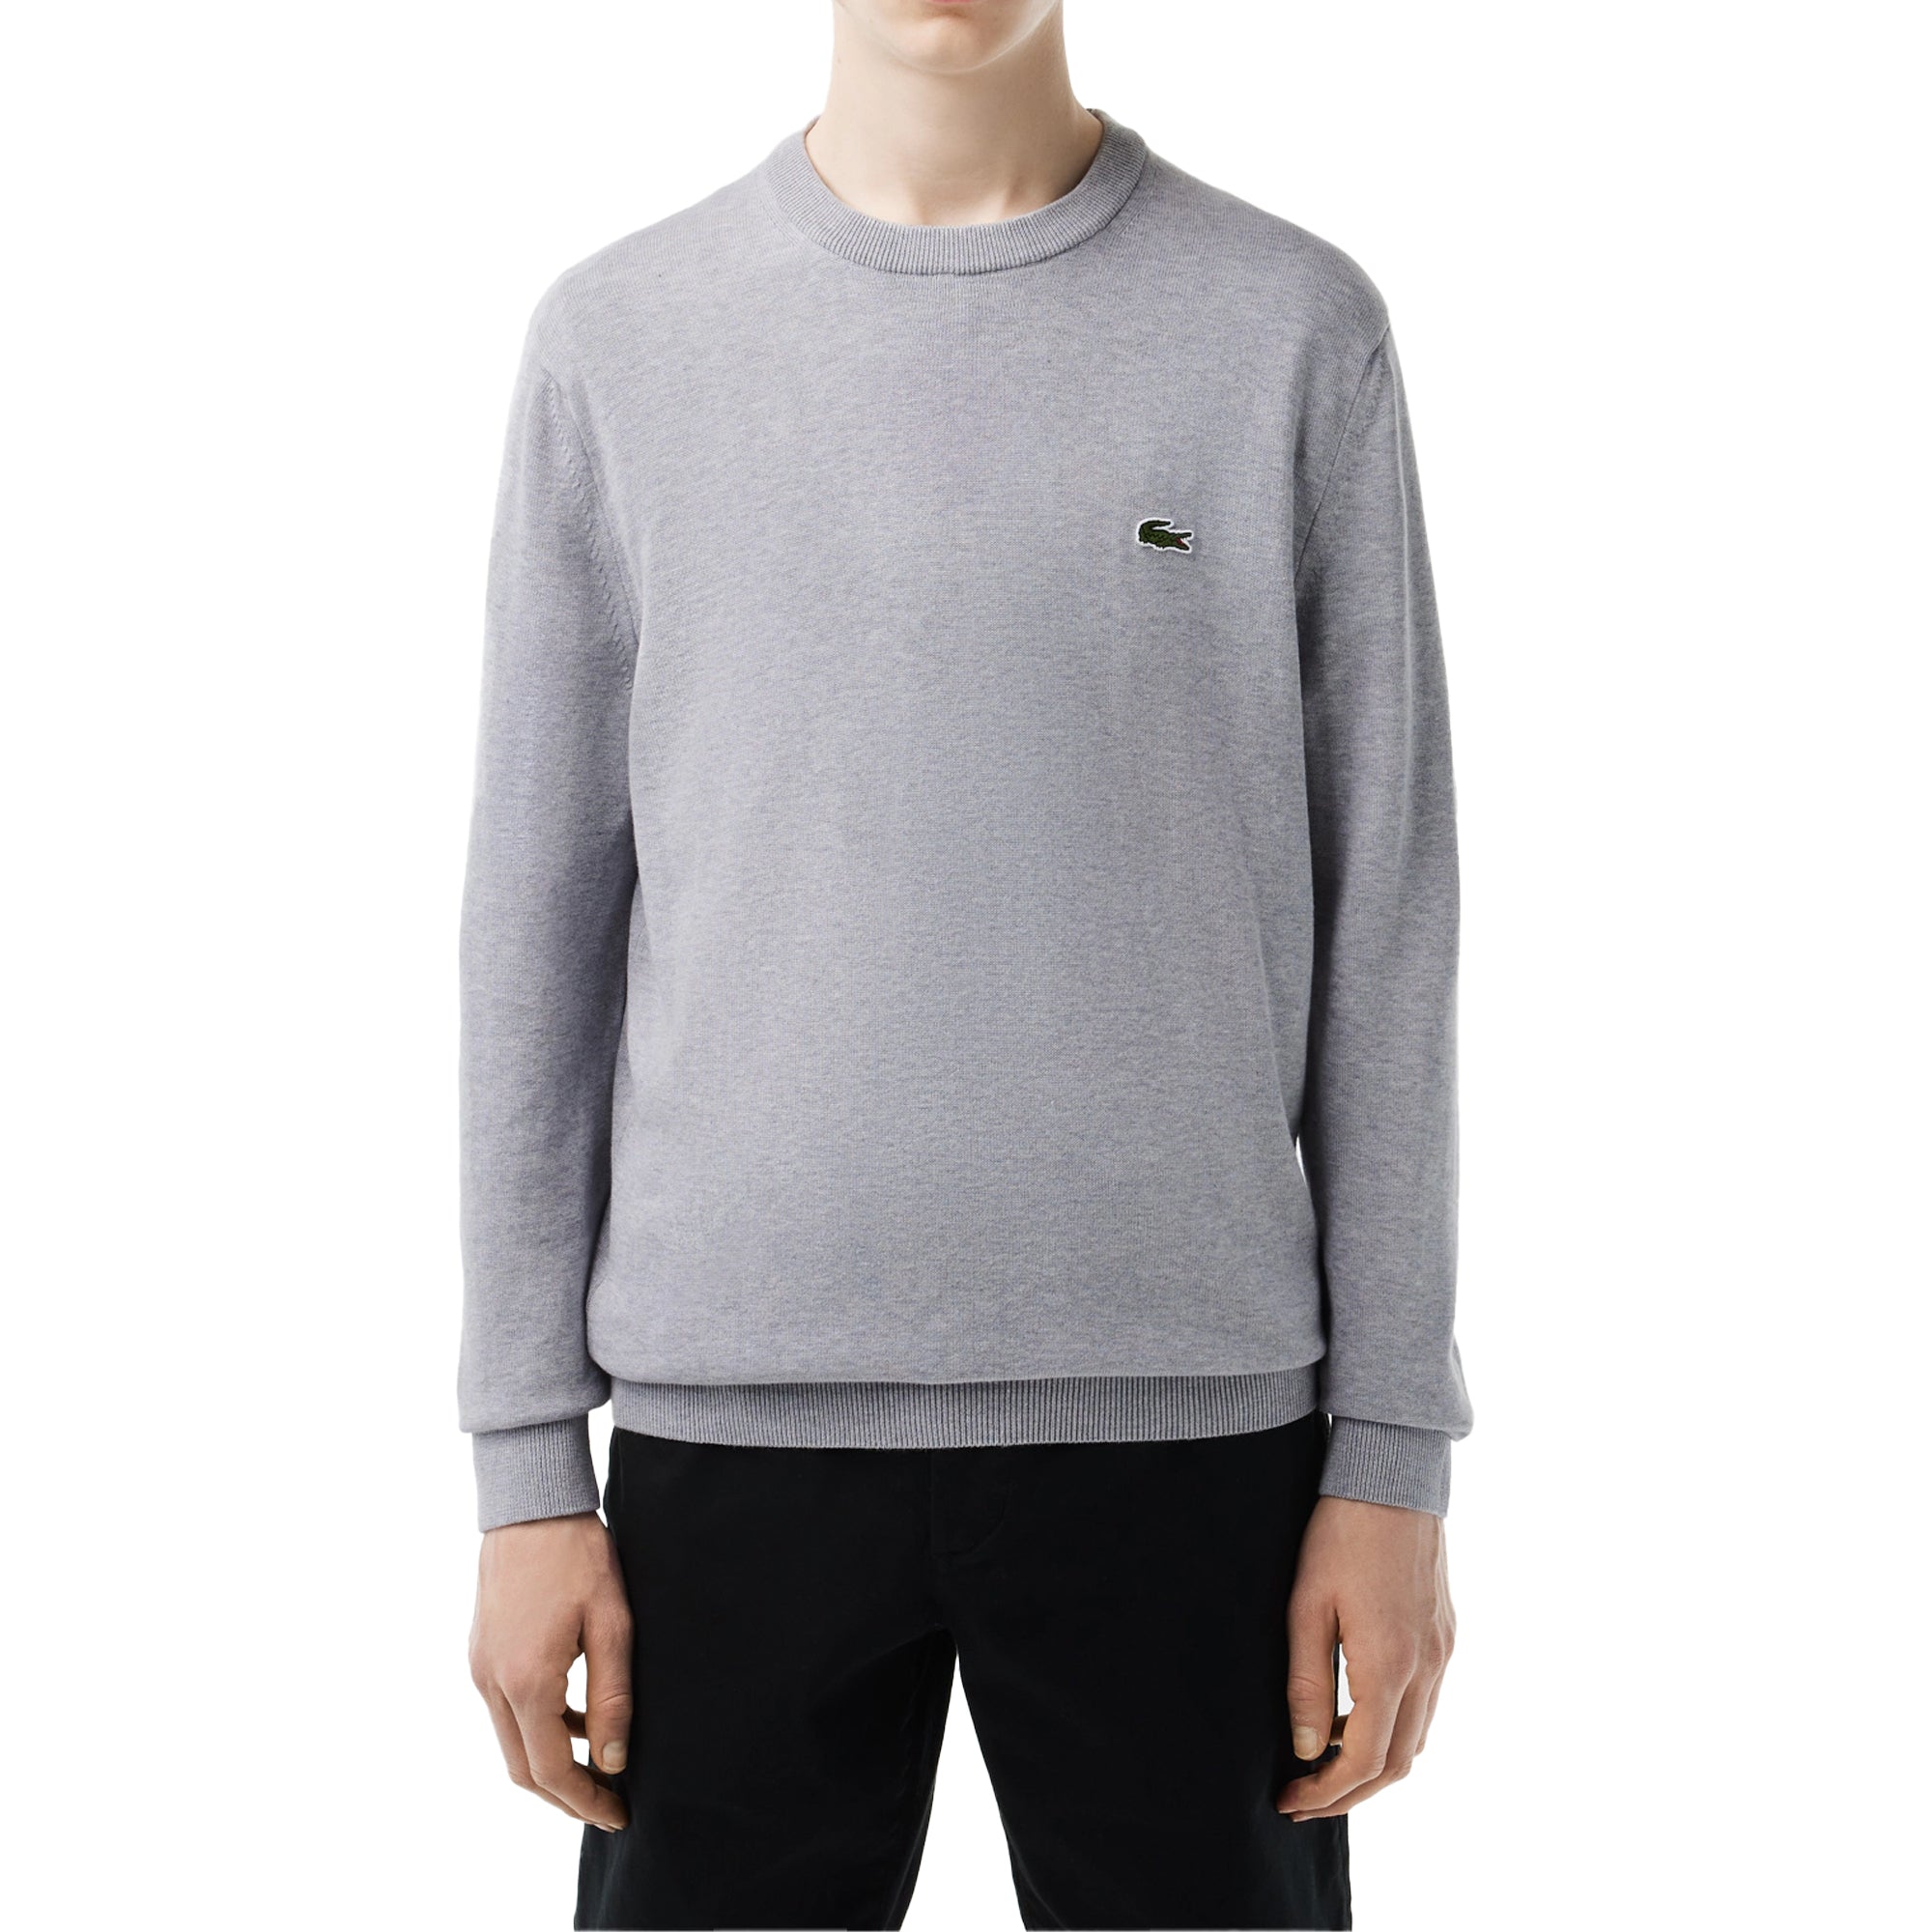 Lacoste New Cotton Crew Knit AH1985 - Silver Grey